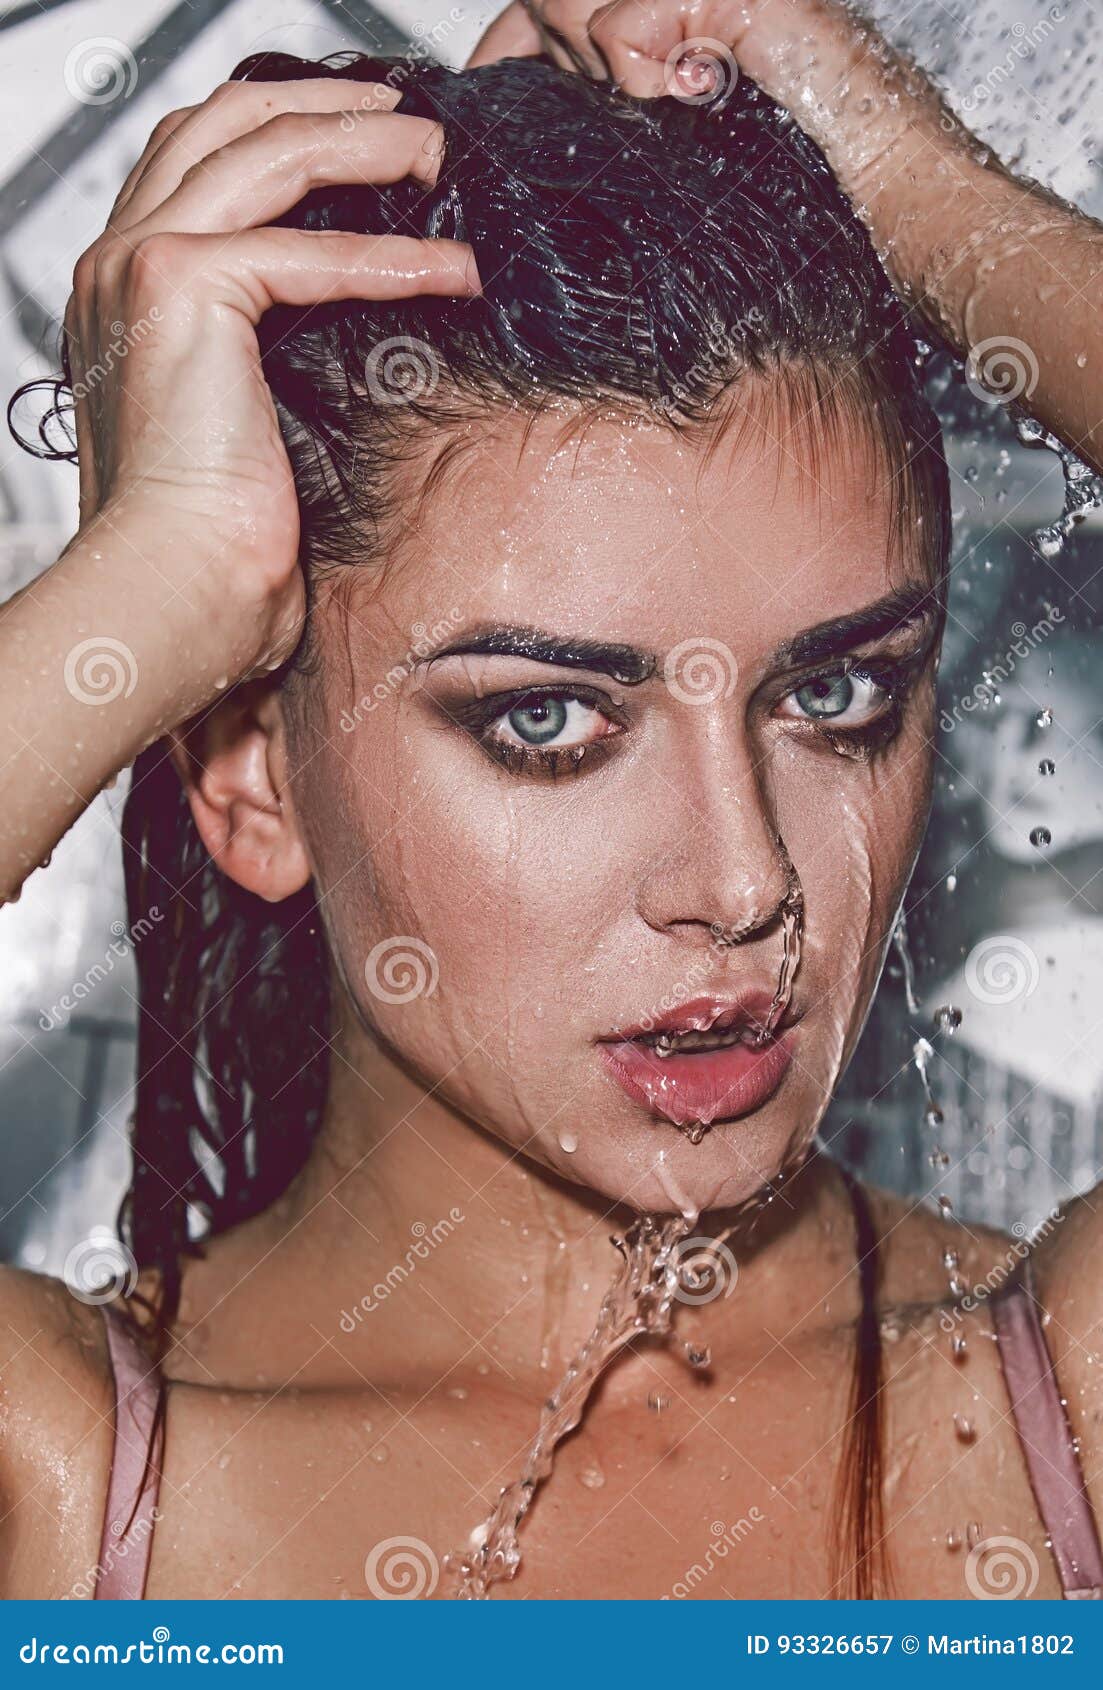 Wet Girl At Shower Stock Image Image Of Hair Attractive 93326657